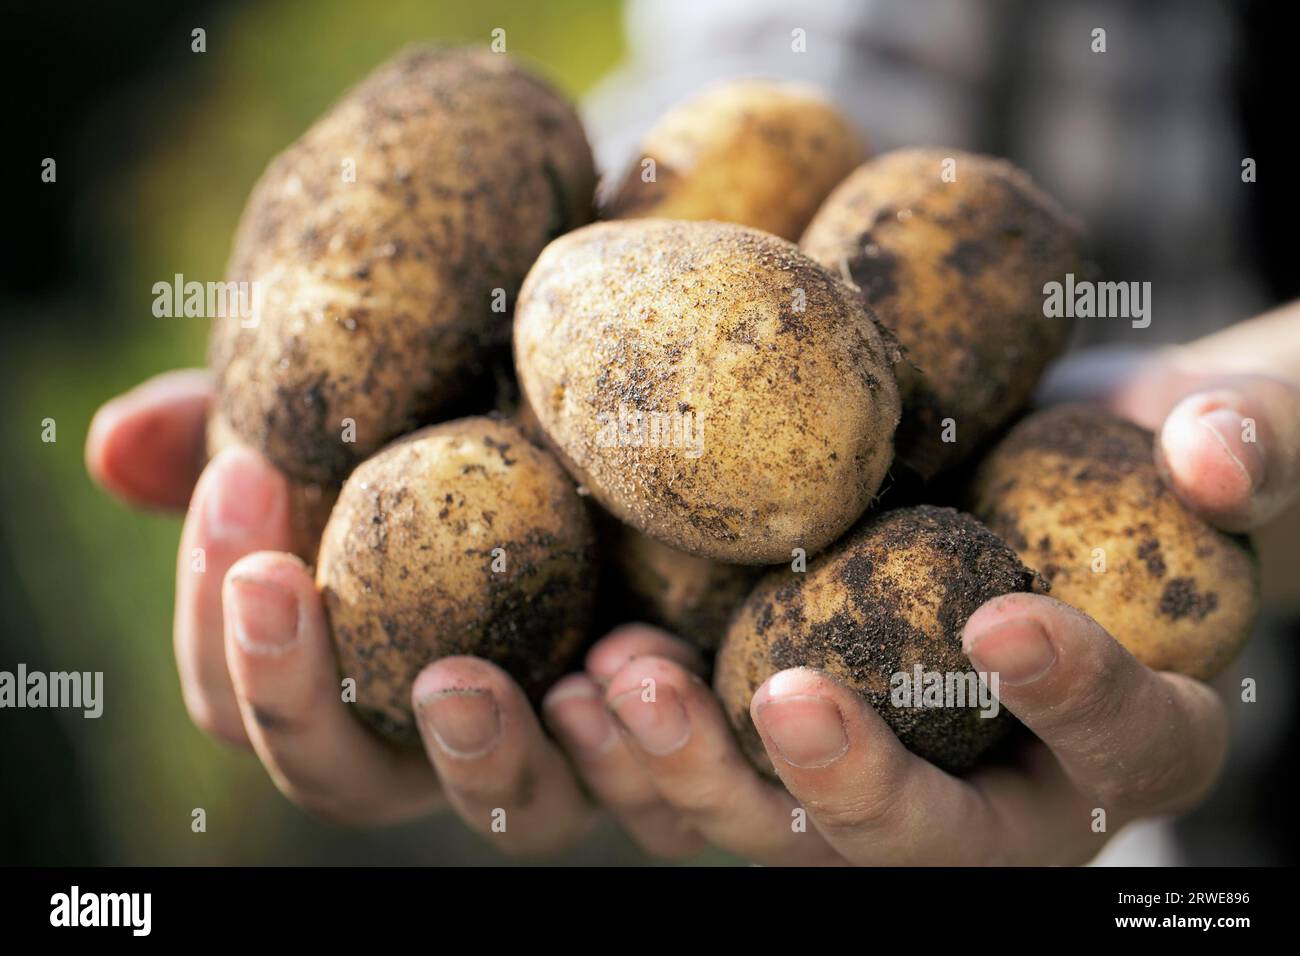 Farmer holding harvested dirty potatoes in his hands. Very short depth-of-field Stock Photo